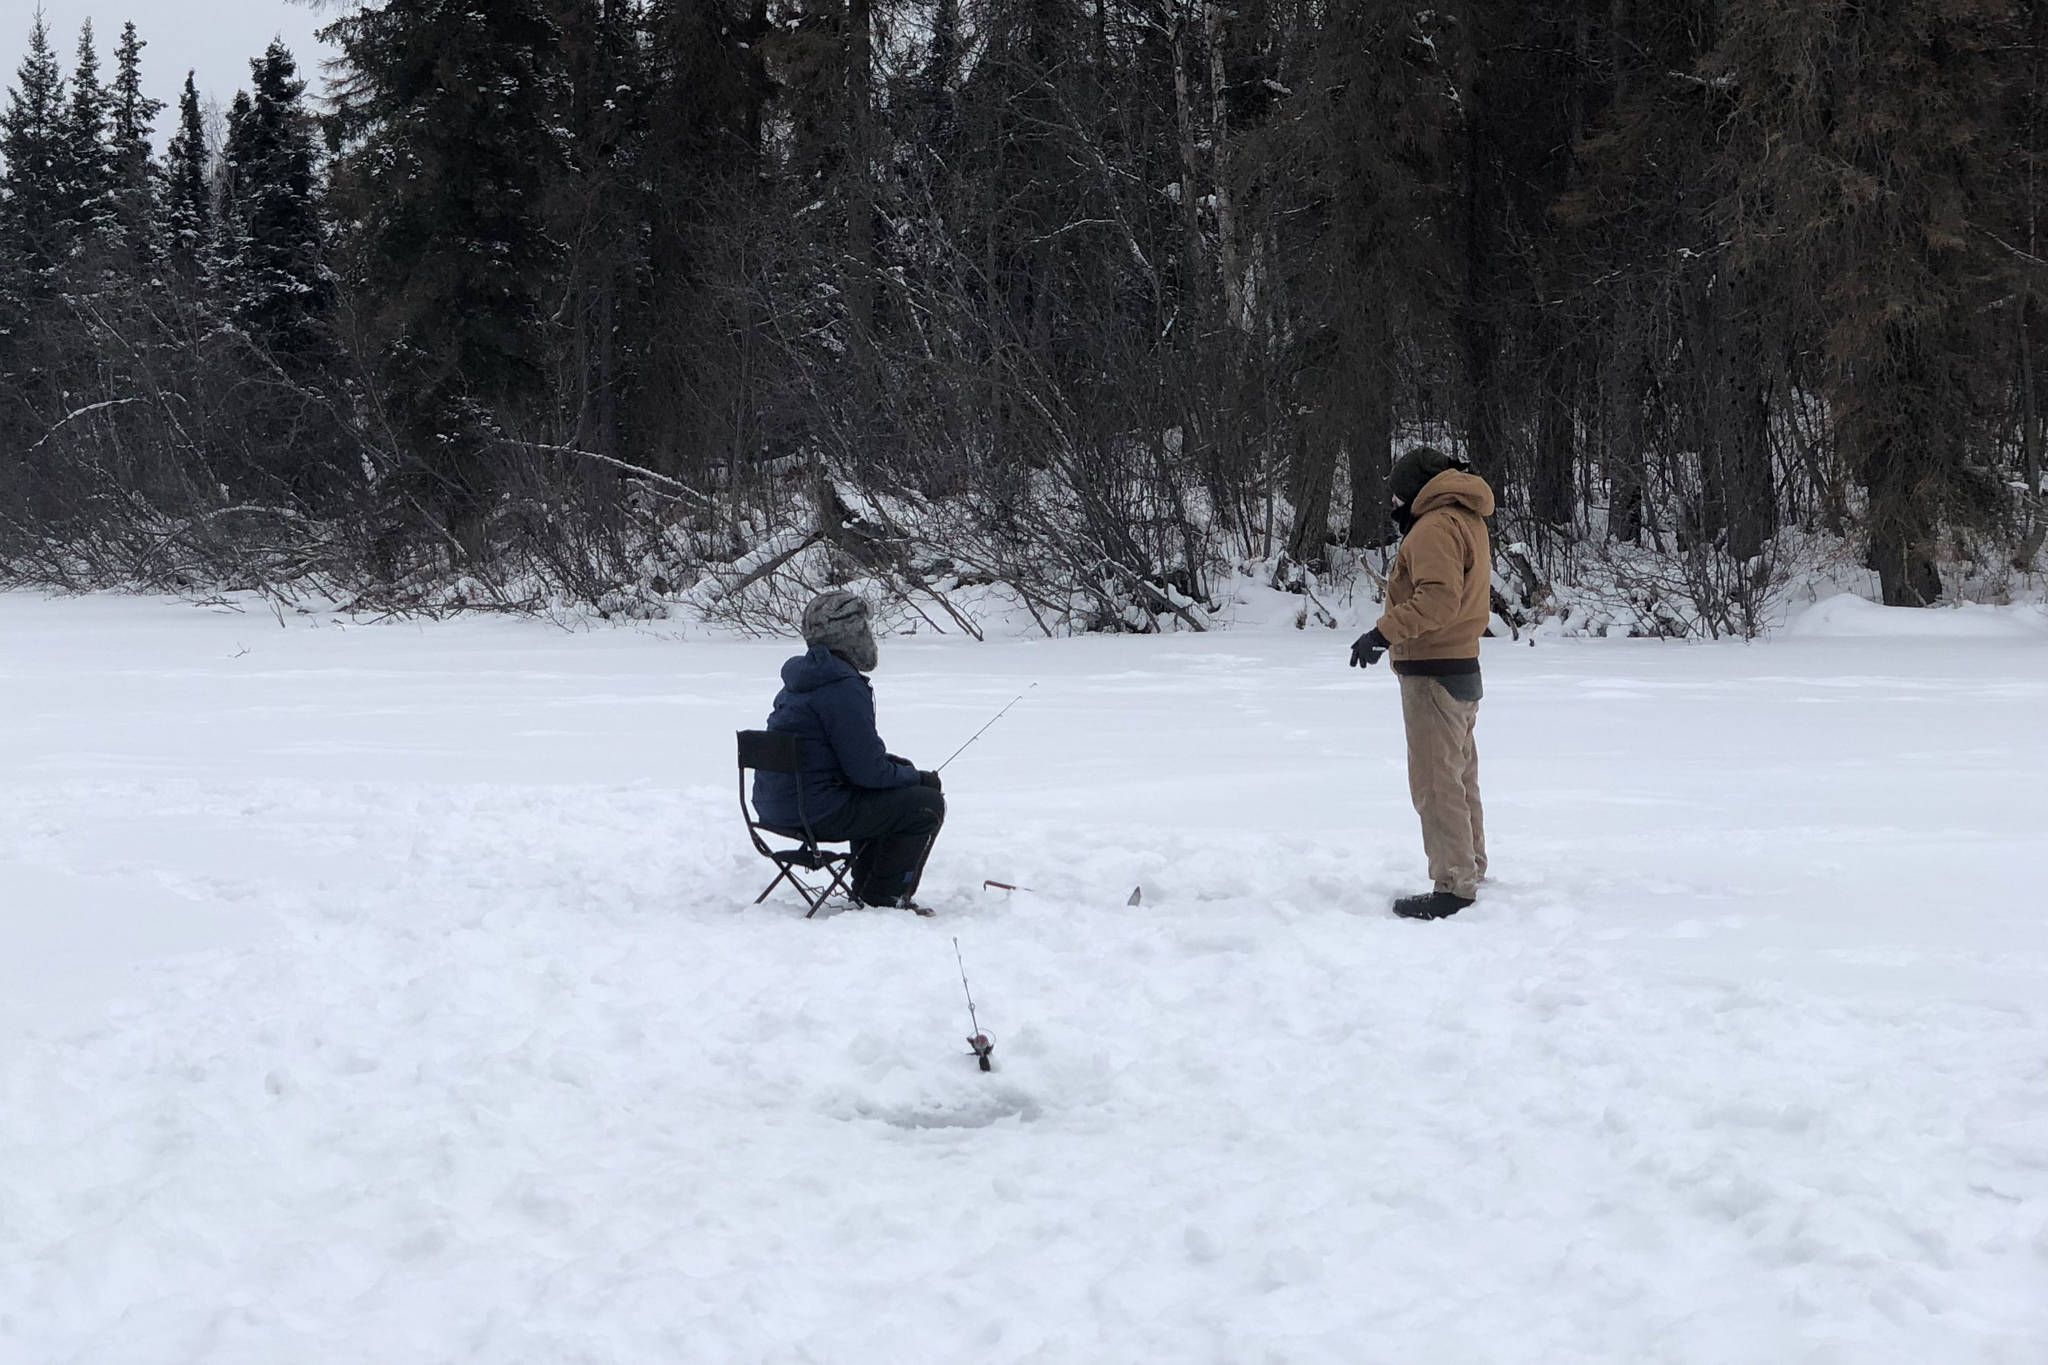 Brian Mazurek, left, and Ben Weagraff, right, are seen ice fishing on Paddle Lake off of Swan Lake Road in Sterling, Alaska on Feb. 2, 2020. (Photo by Victoria Petersen/Peninsula Clarion)